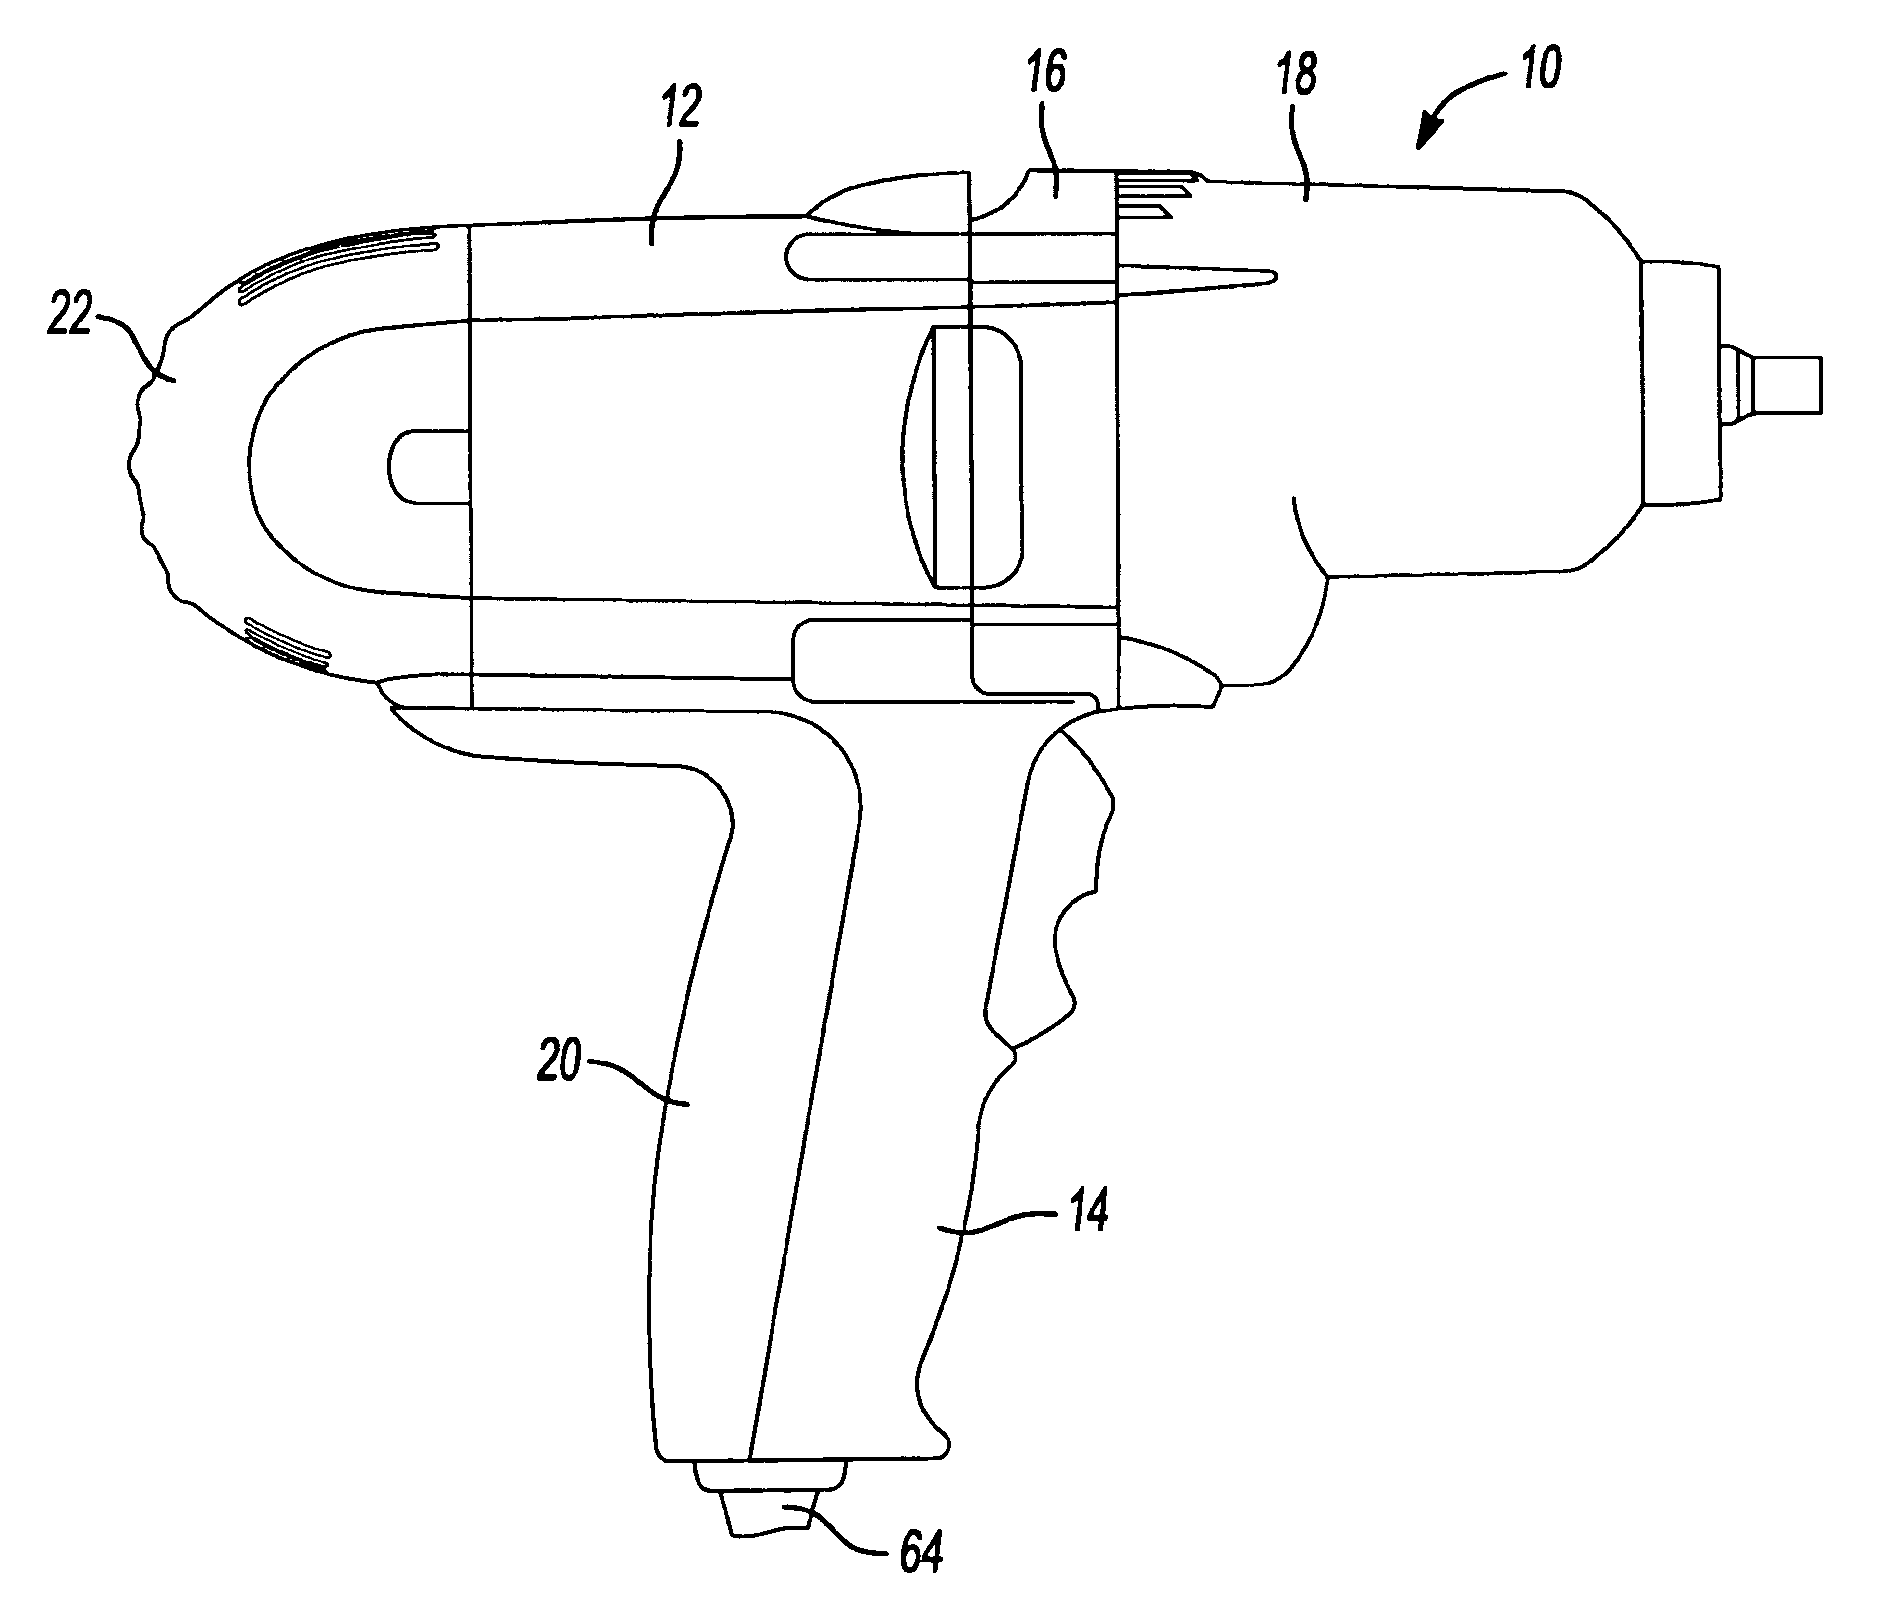 Motor housing and assembly process for impact wrench